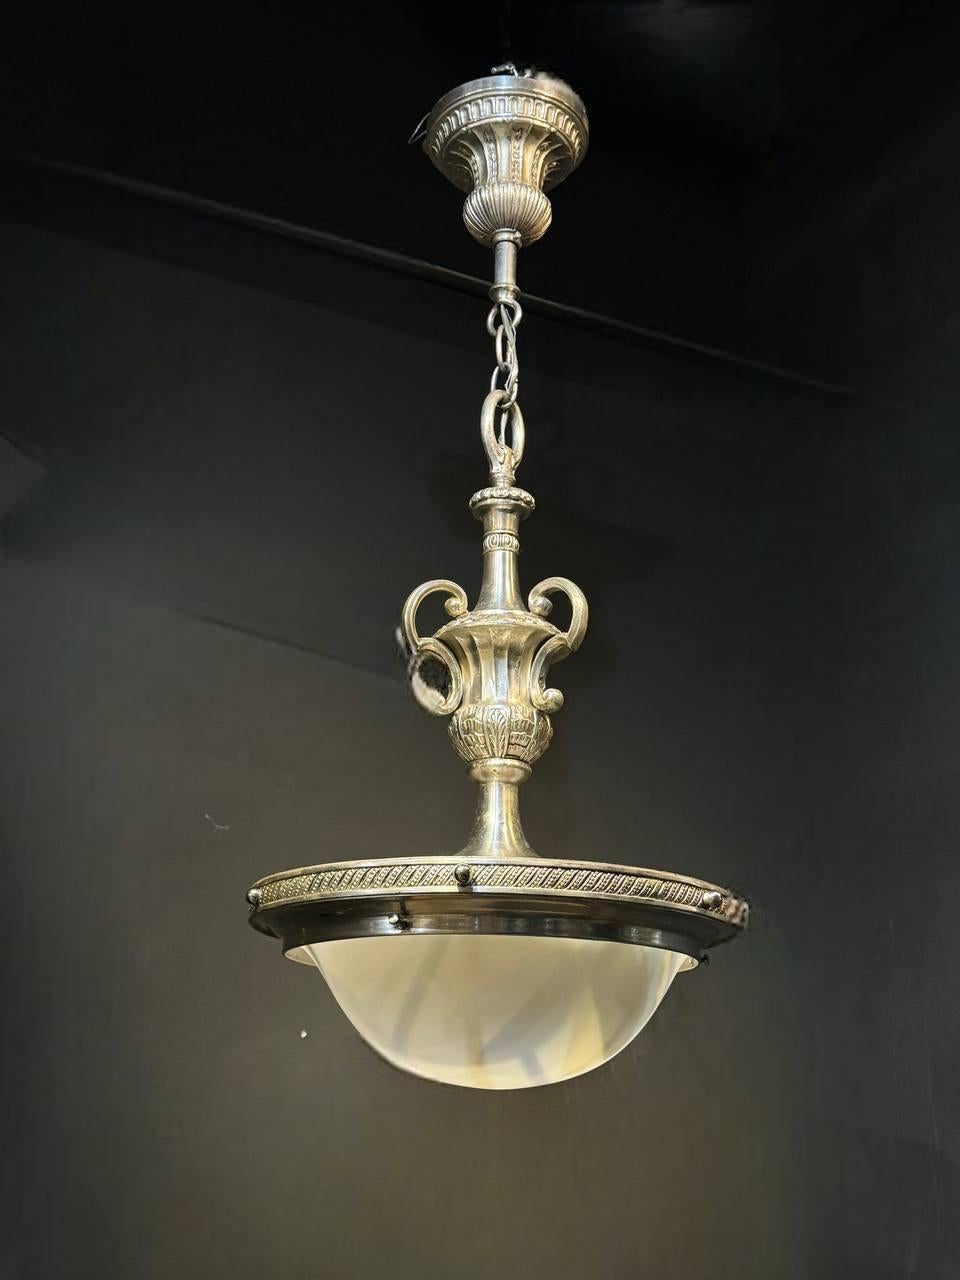 French Provincial 1930's French Light Fixture with Opaline Glass For Sale